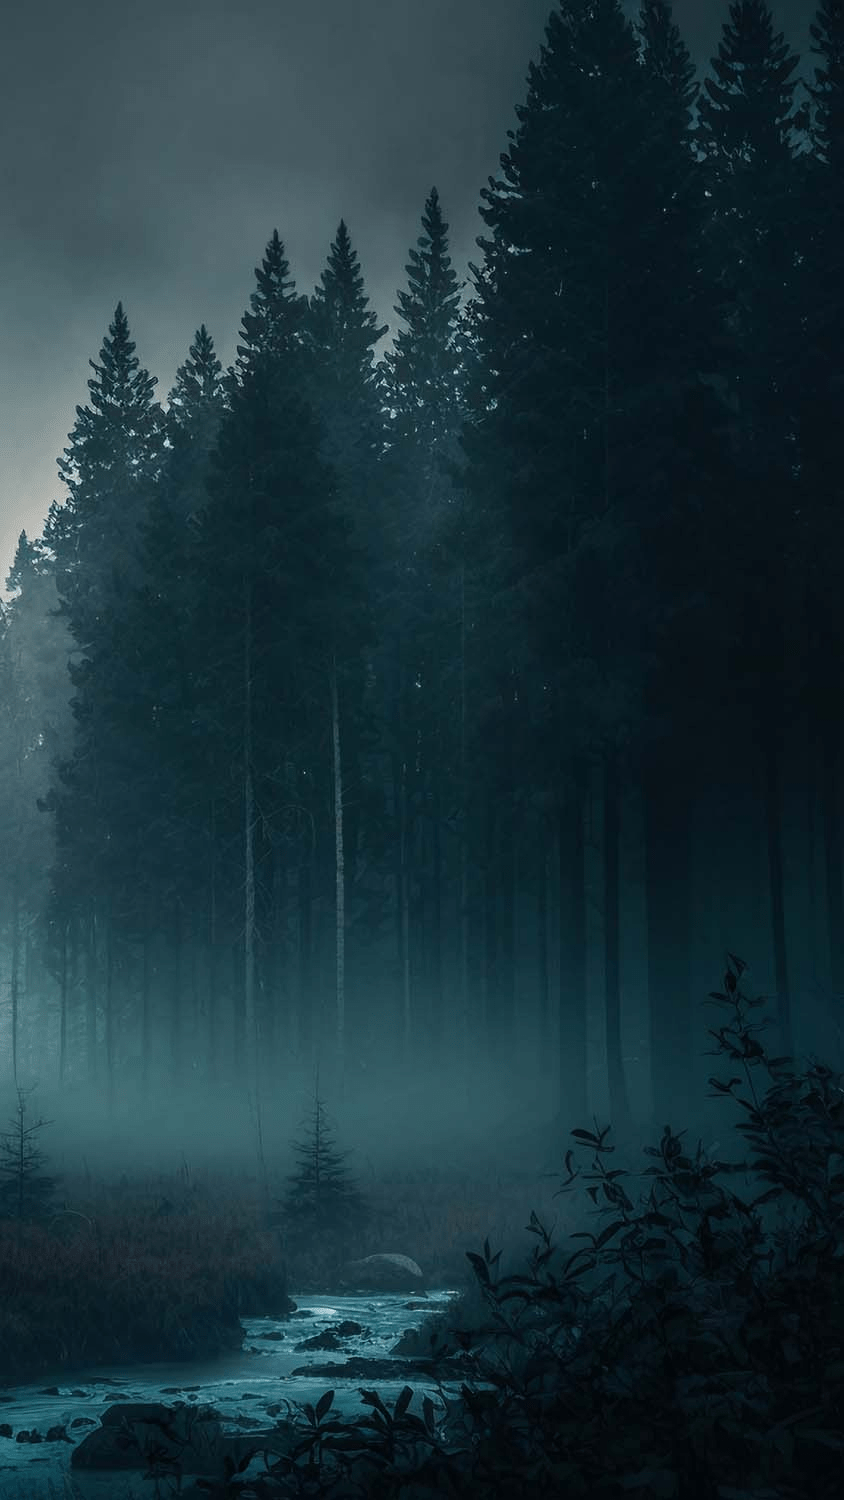 Forest Mist Trees IPhone Wallpaper HD Wallpaper : iPhone Wallpaper. Forest wallpaper iphone, Forest photography, Mystical forest